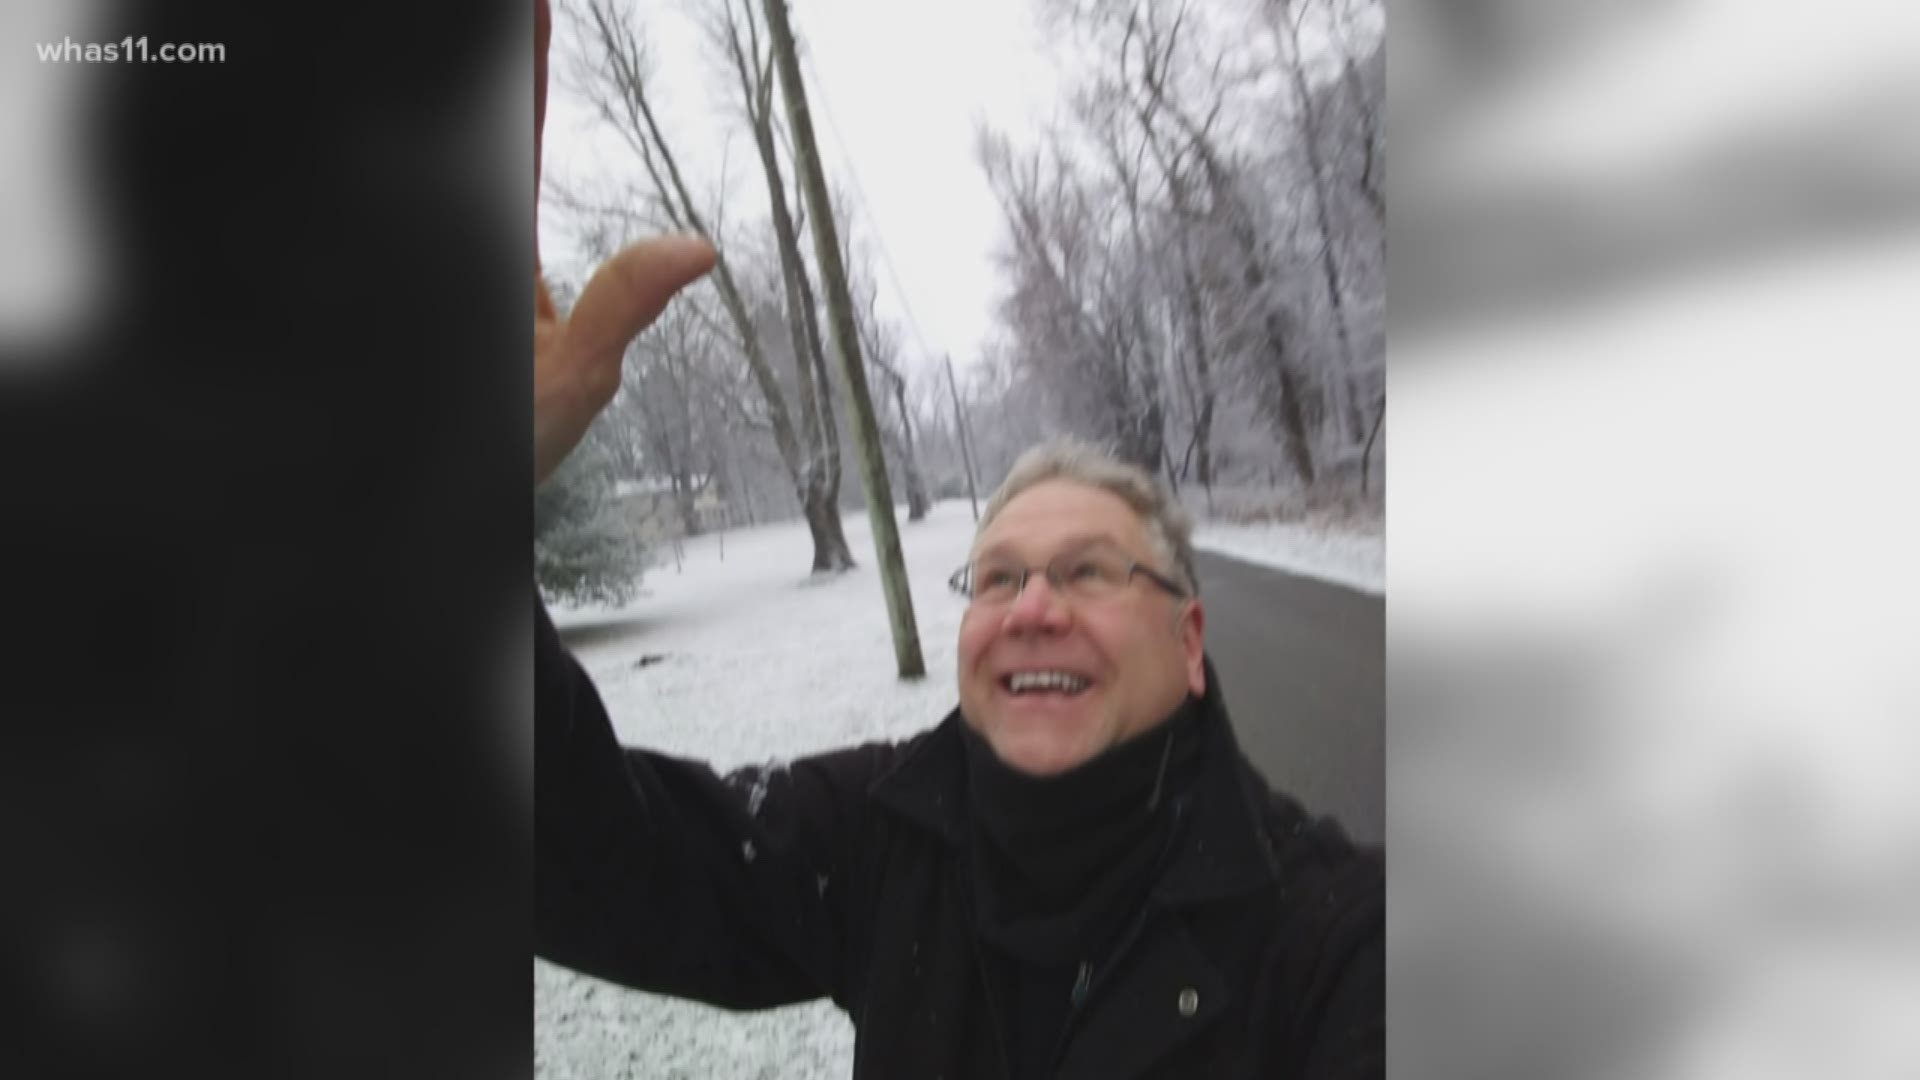 Local area viewers share photos of the snow in the area while WHAS11 staple, 'Bellavia' plays.